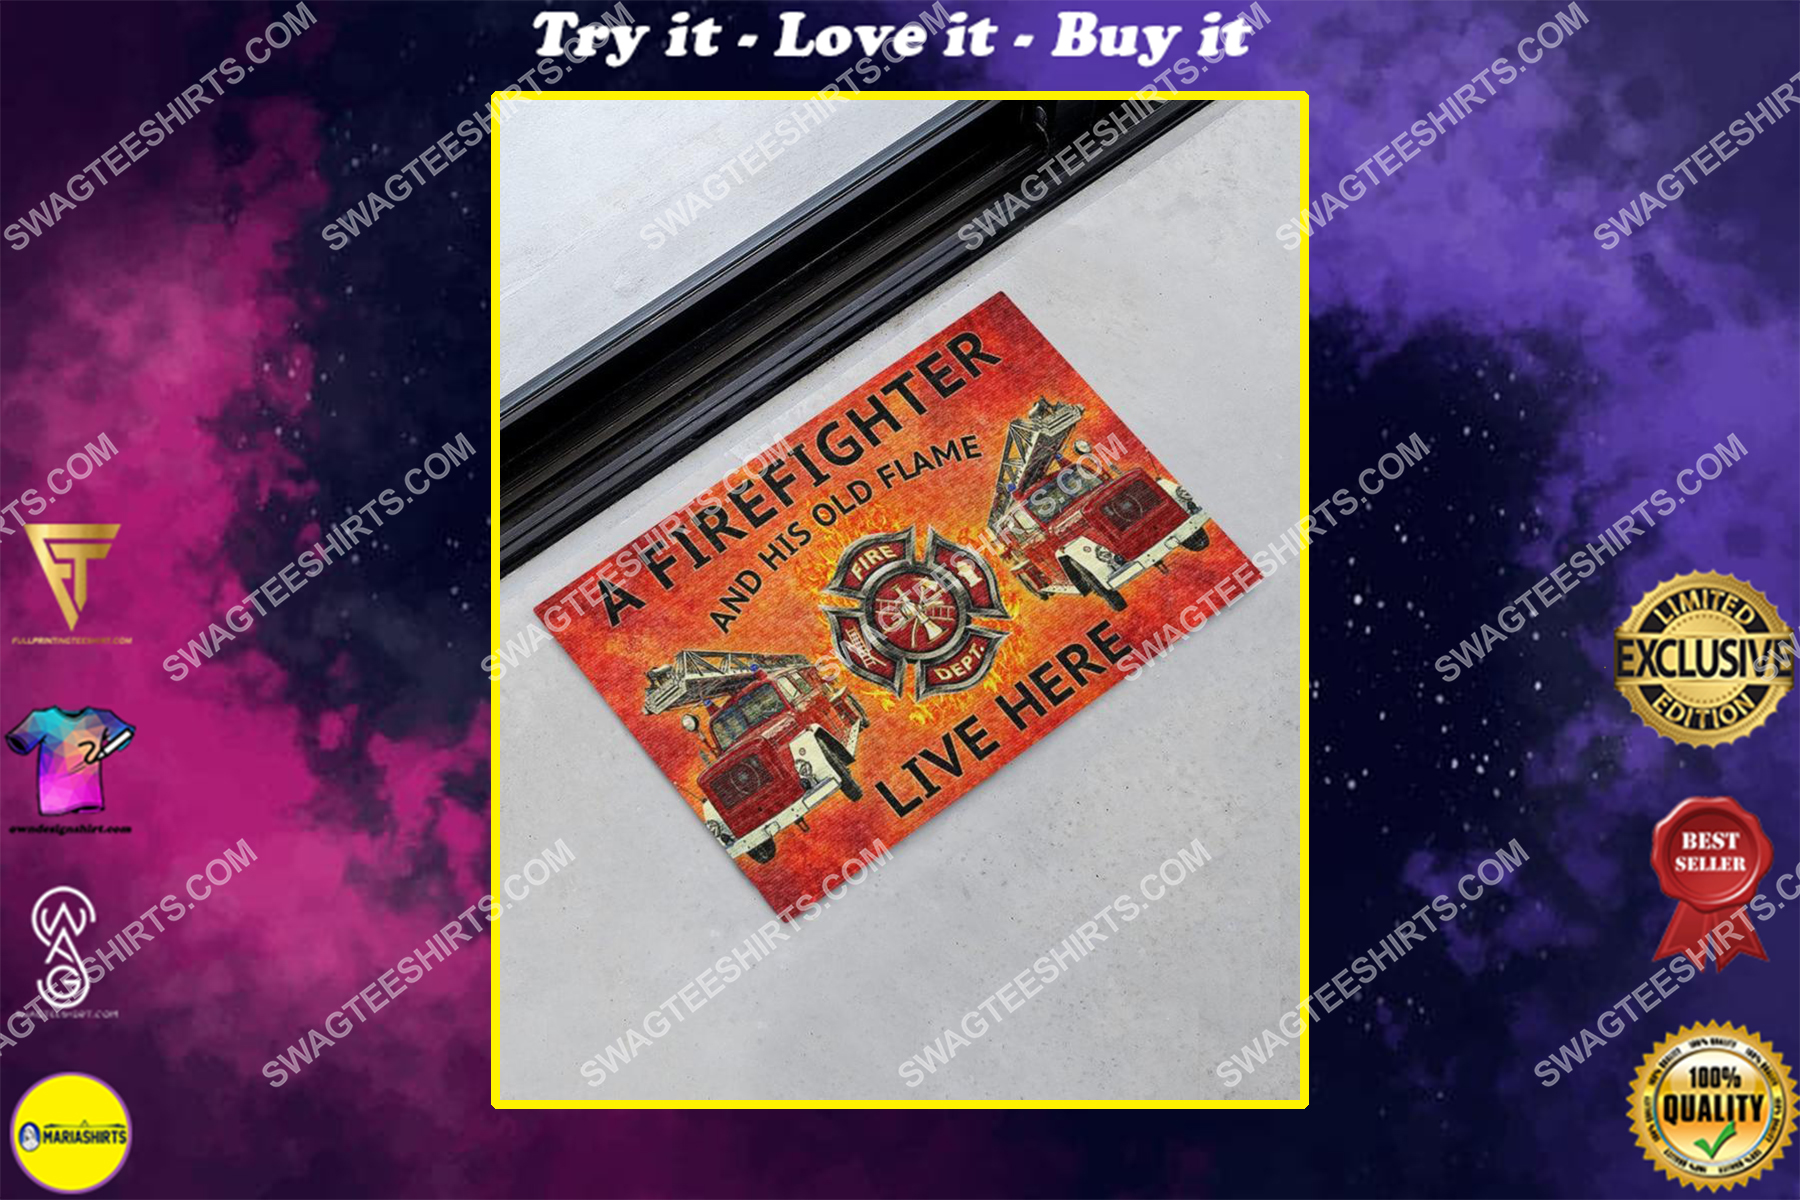 a firefighter and his old flame live here full print doormat